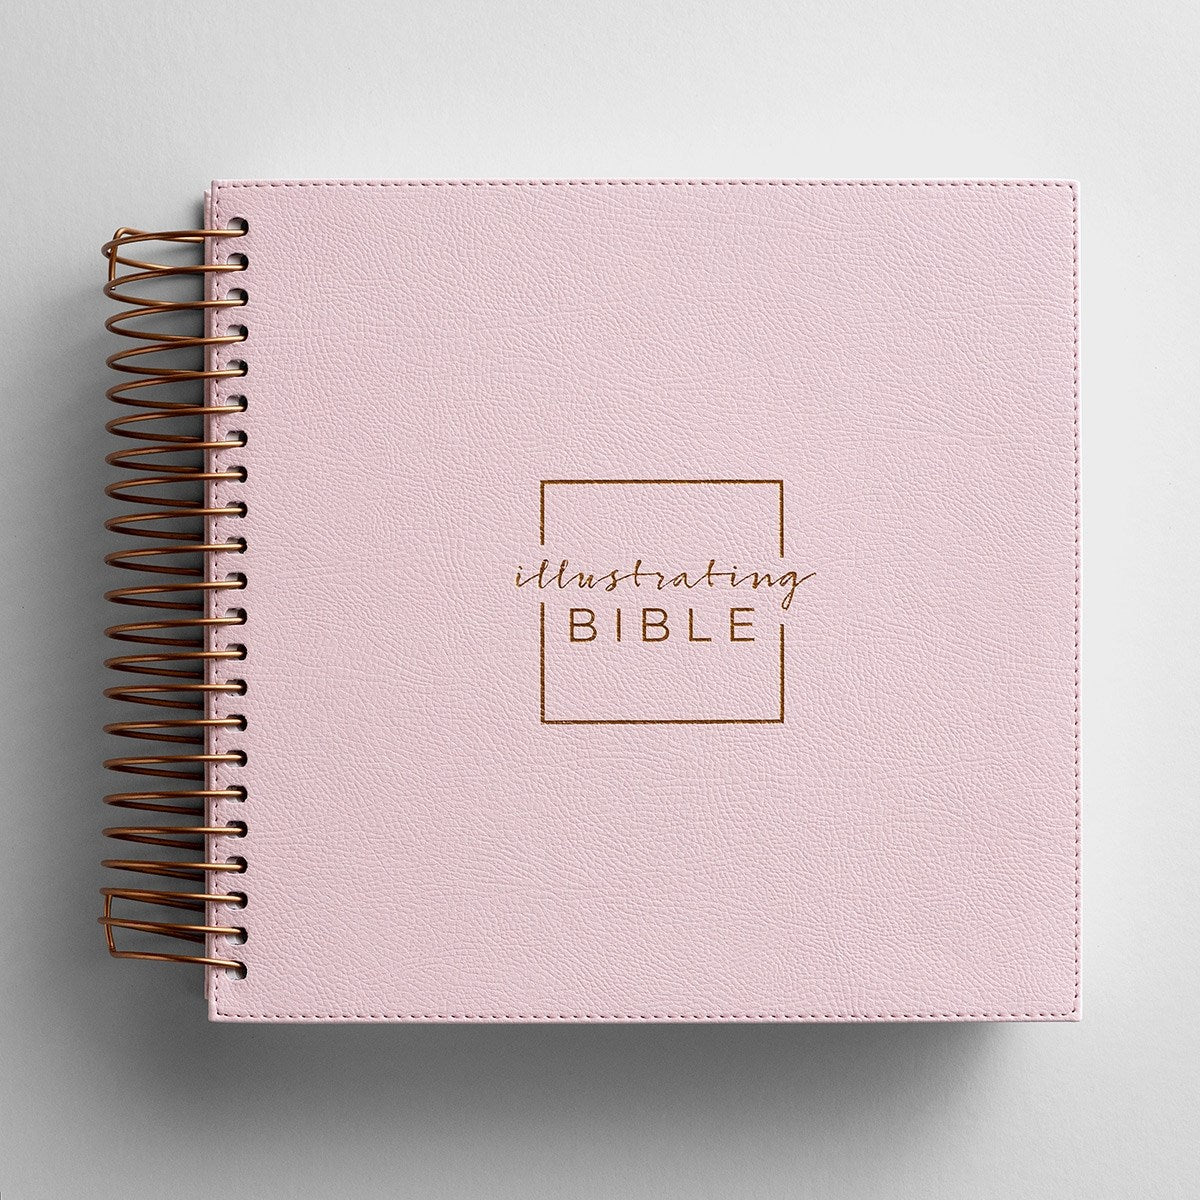 Seed of Abraham Christian Bookstore - (In)Courage - NIV Illustrating Bible-Pink Faux Leather